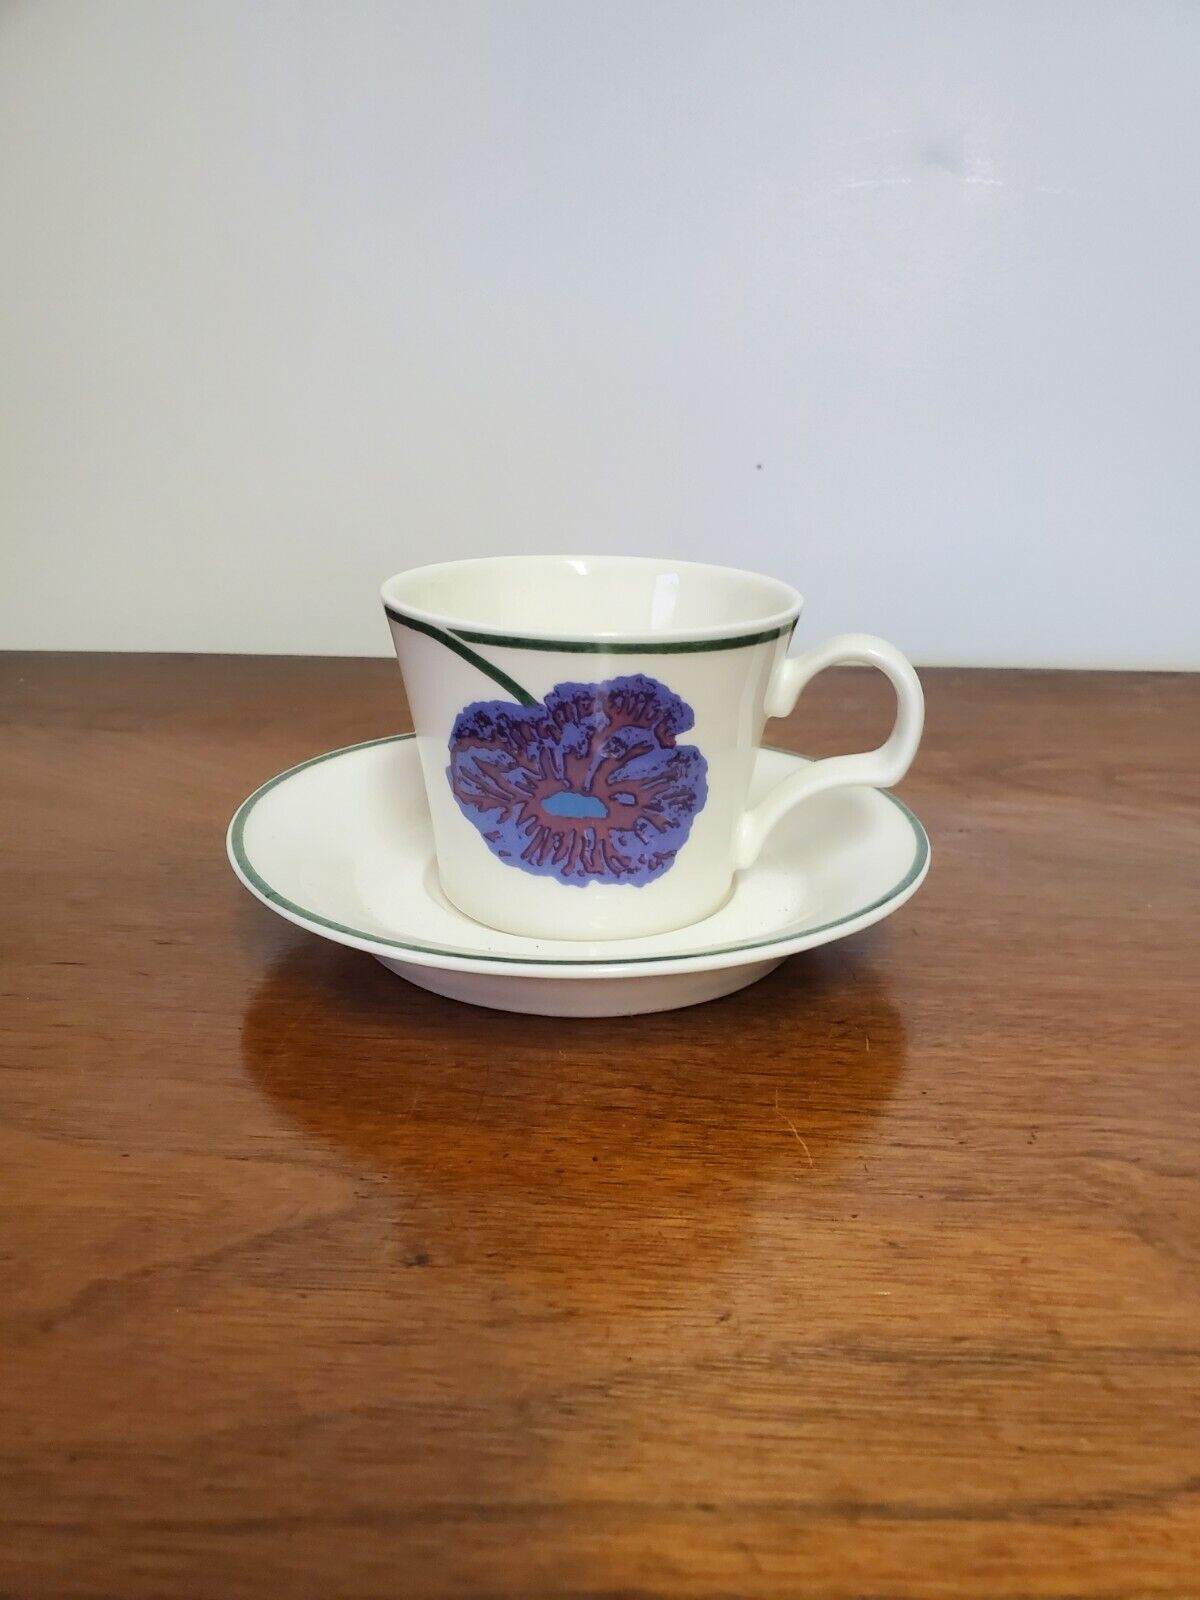 Read more about the article Arabia Finland Illusia Teacup And Saucer excellent condition